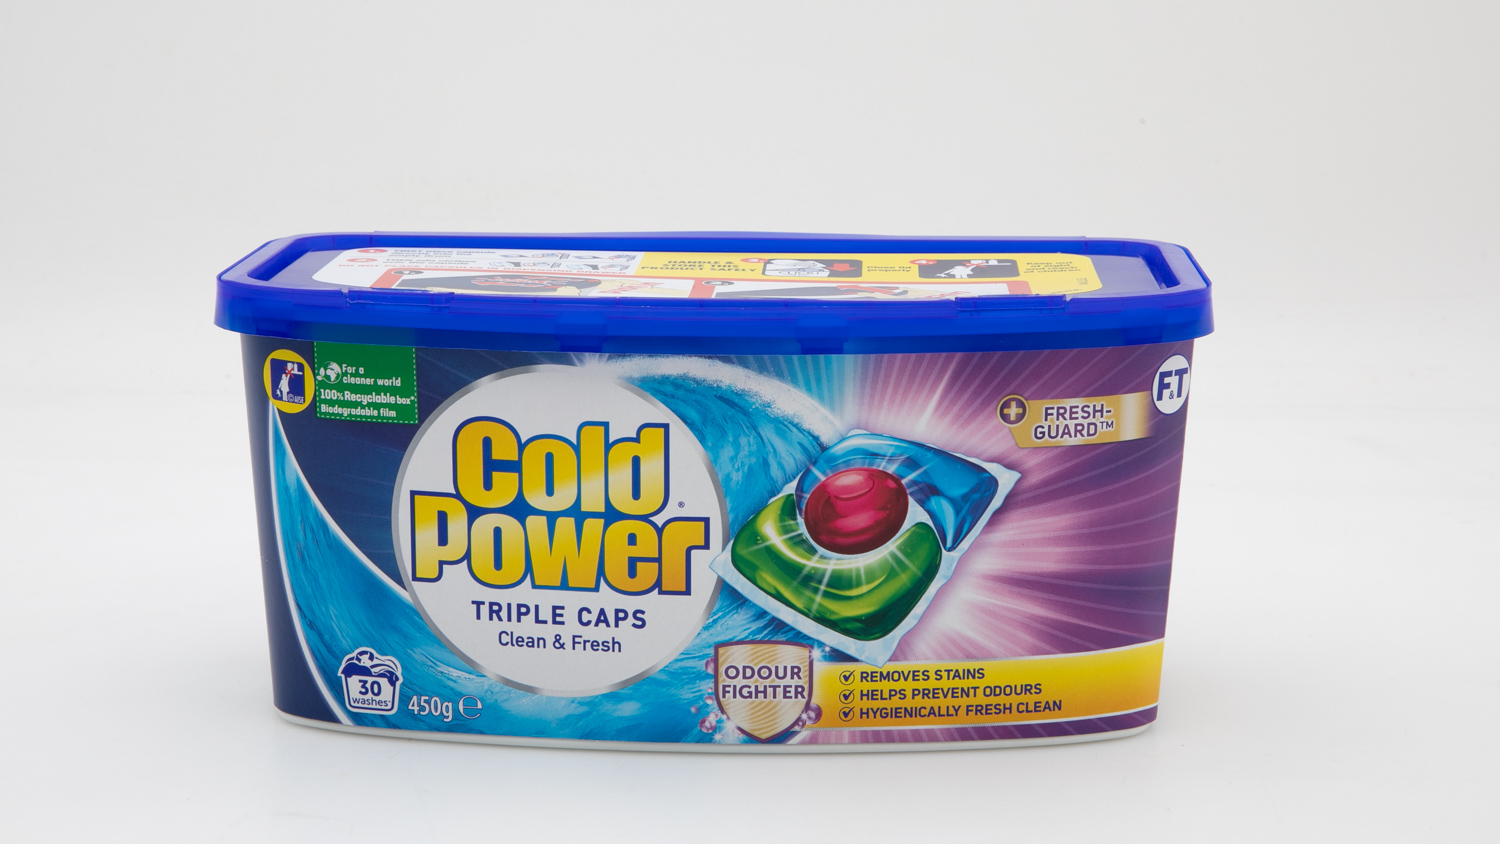 Cold Power Triple Caps Clean & Fresh Odour Fighter 30 Capsules 450g Top Loader carousel image